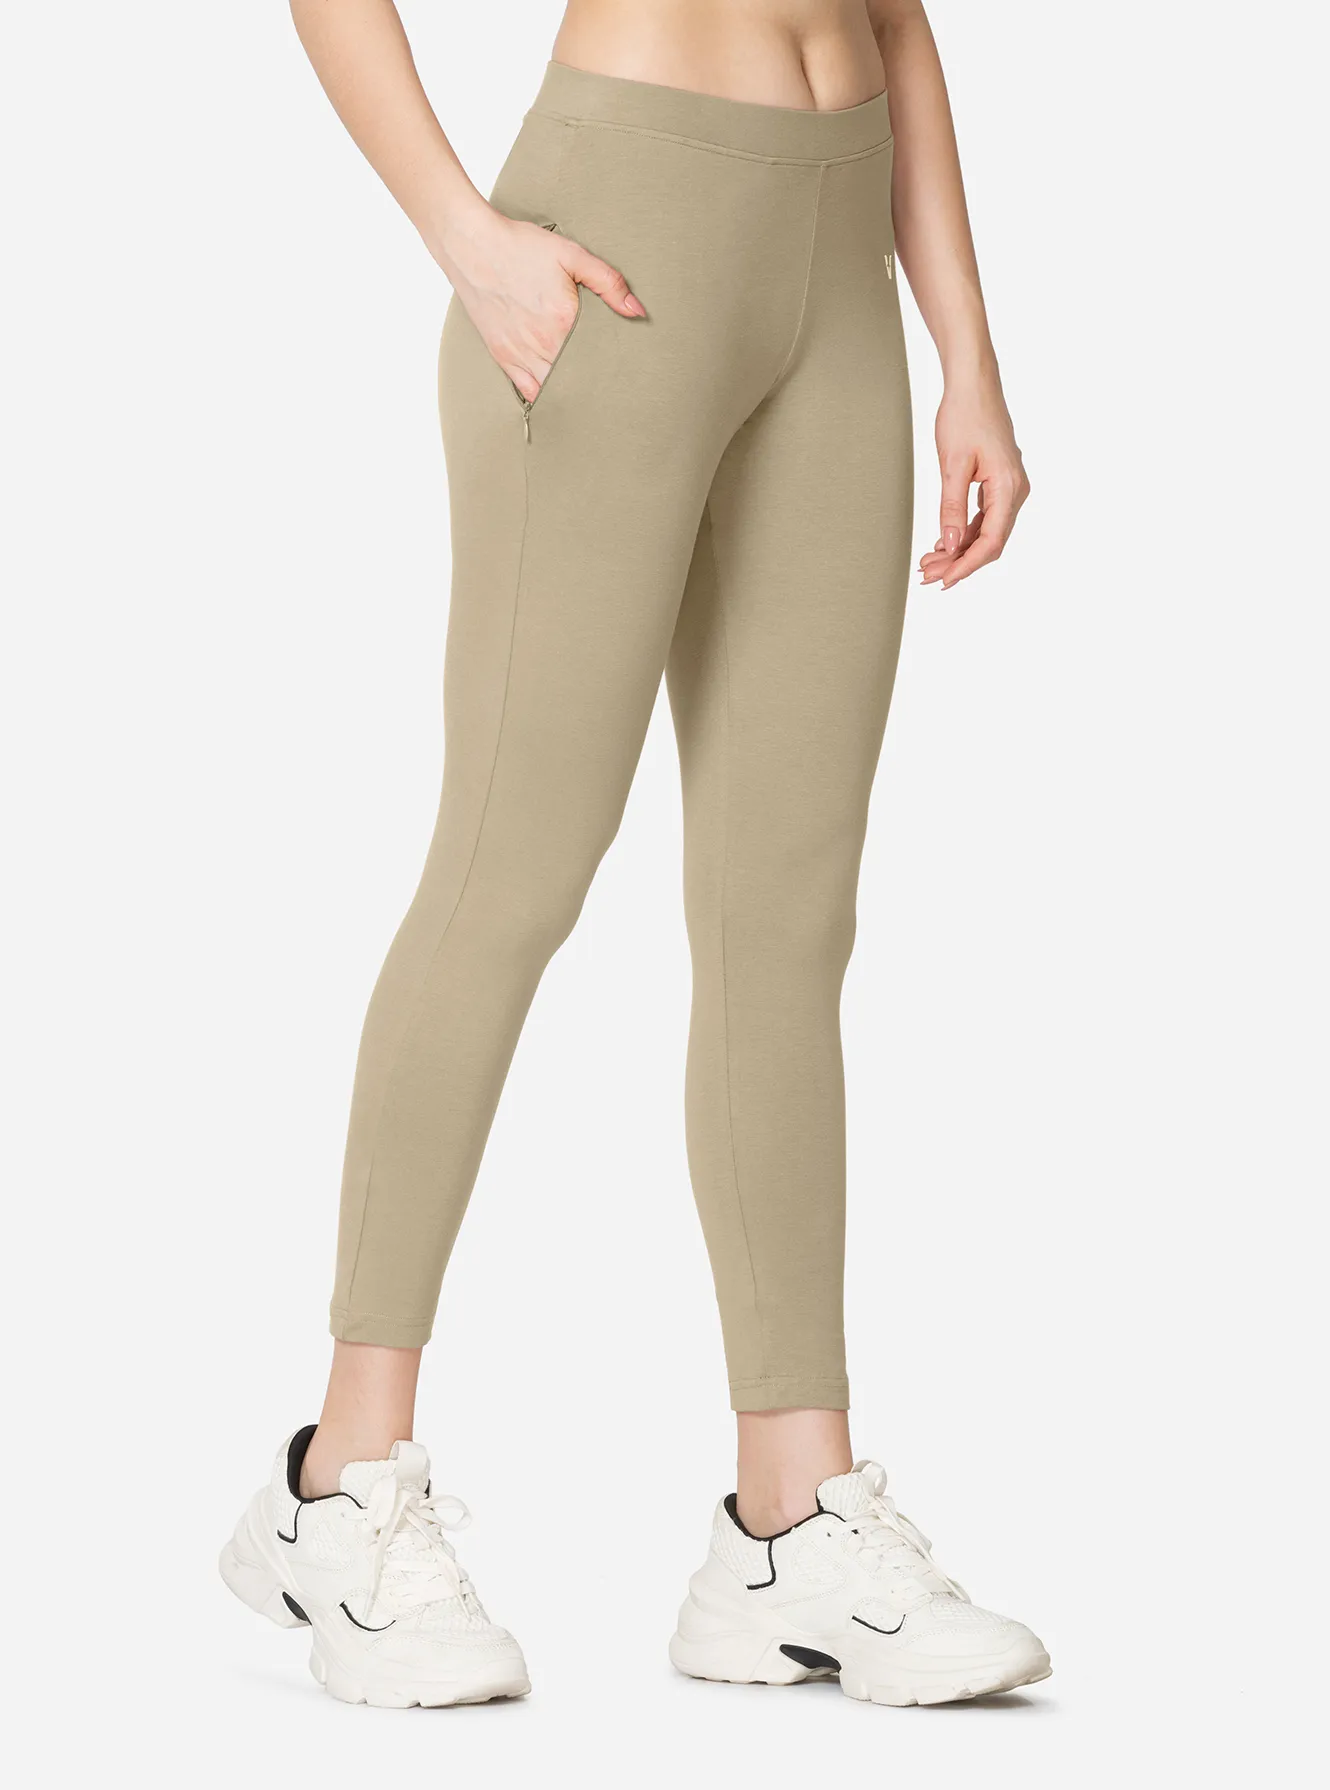 Buy Comfort Lady Exclusive Mobile Pocket Ankle Length Highly Stretchable  Pant Style Kurti Leggings (White) at Amazon.in